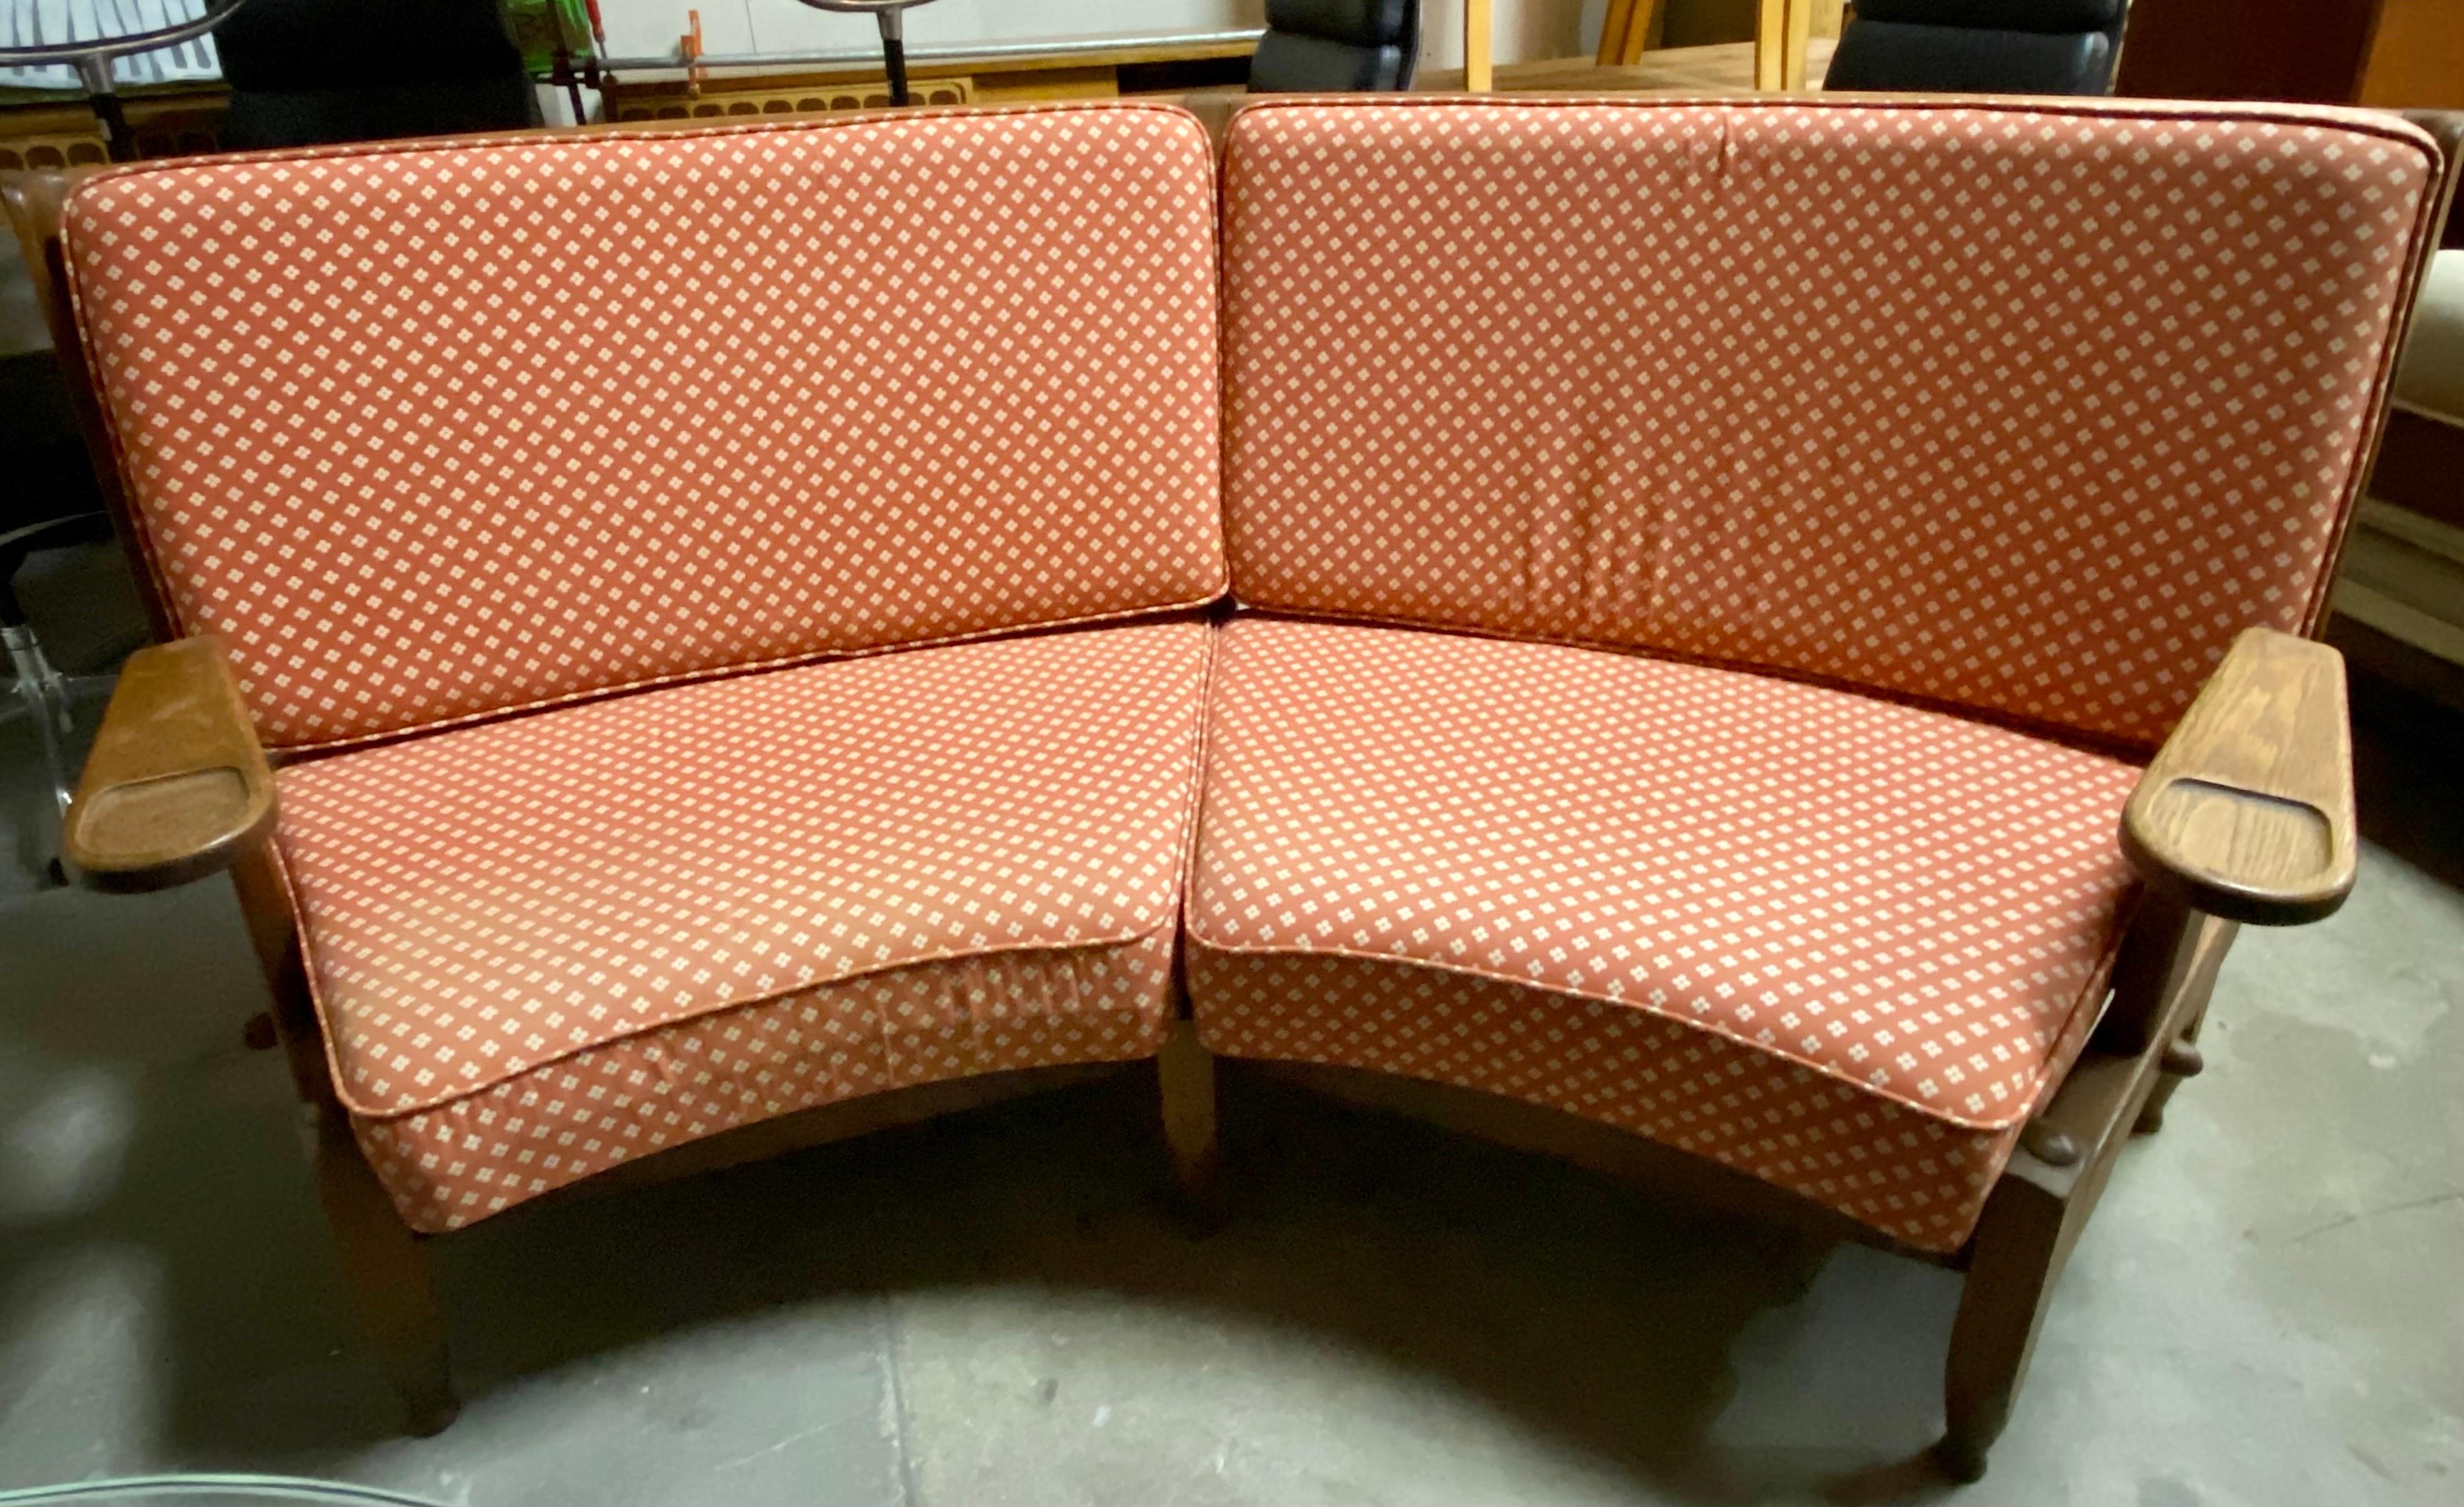 Guillerme et Chambron sofa made of solid oak with fabric upholstery, circa 1950s, France. This vintage French sofa features a curved back with unique wood detailing. Light fading on left lower side of fabric. We do offer in-house reupholstery